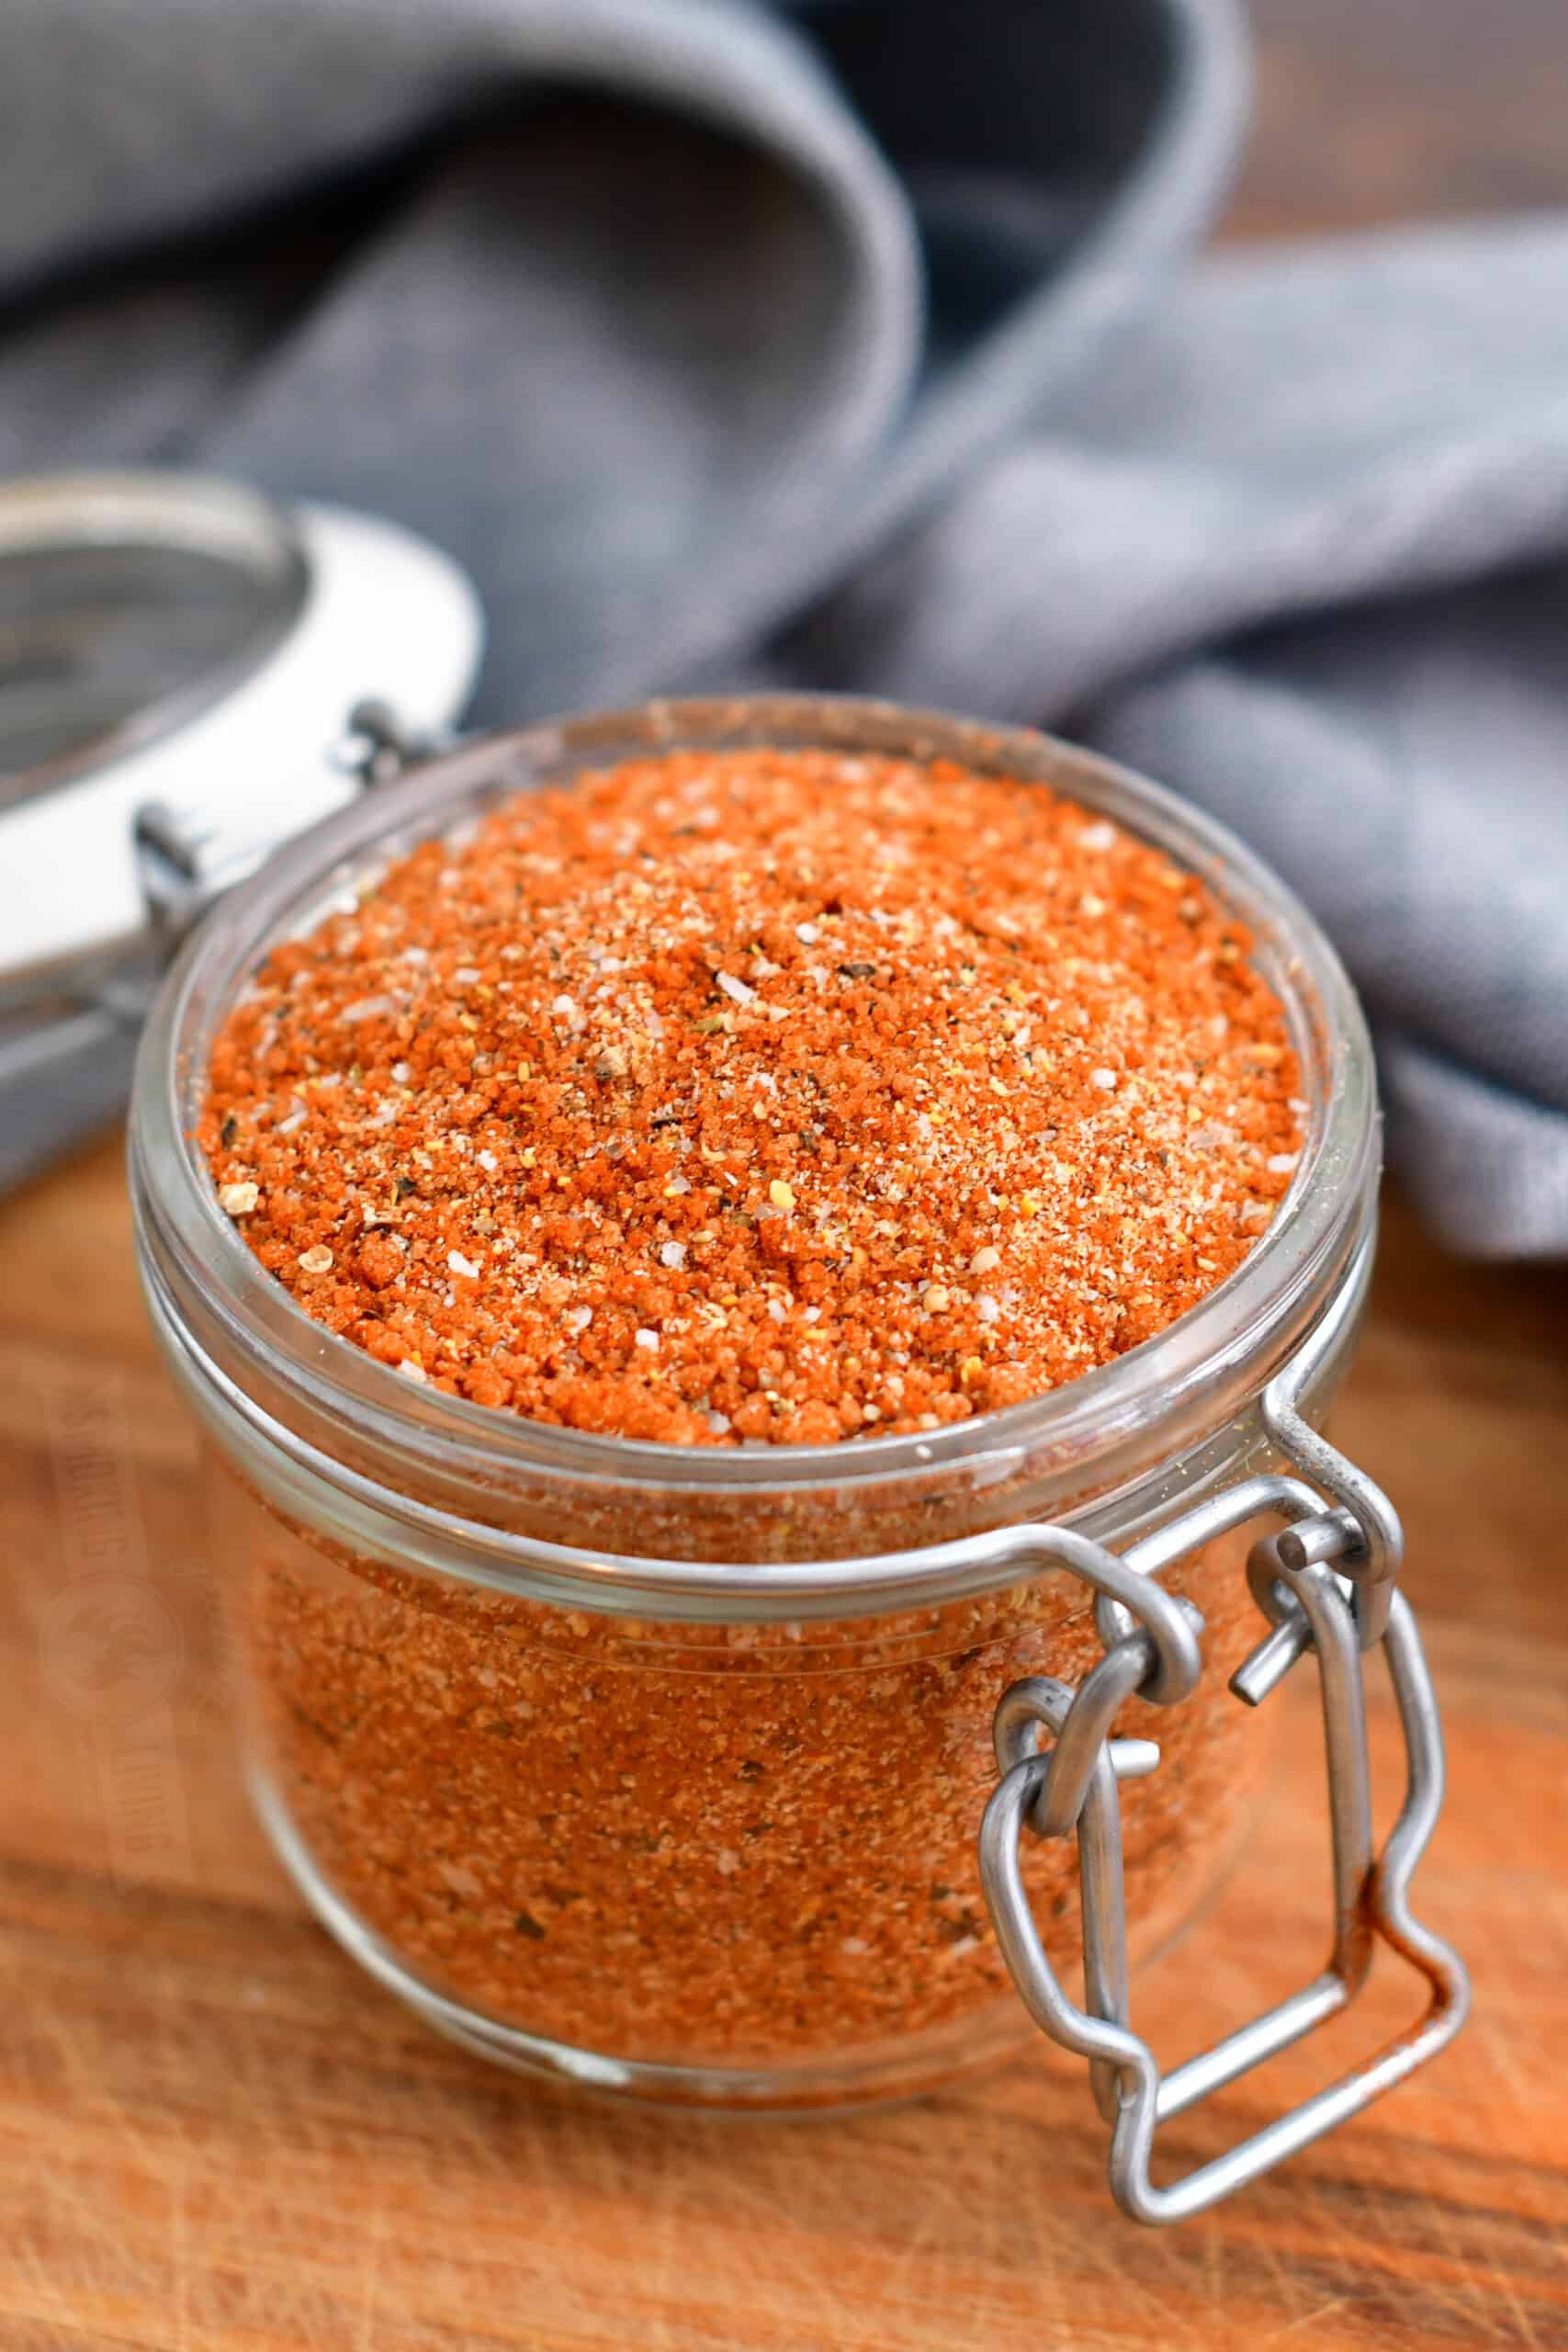 Dry Rub For Ribs - The Best Homemade Dry Rub For Your Ribs